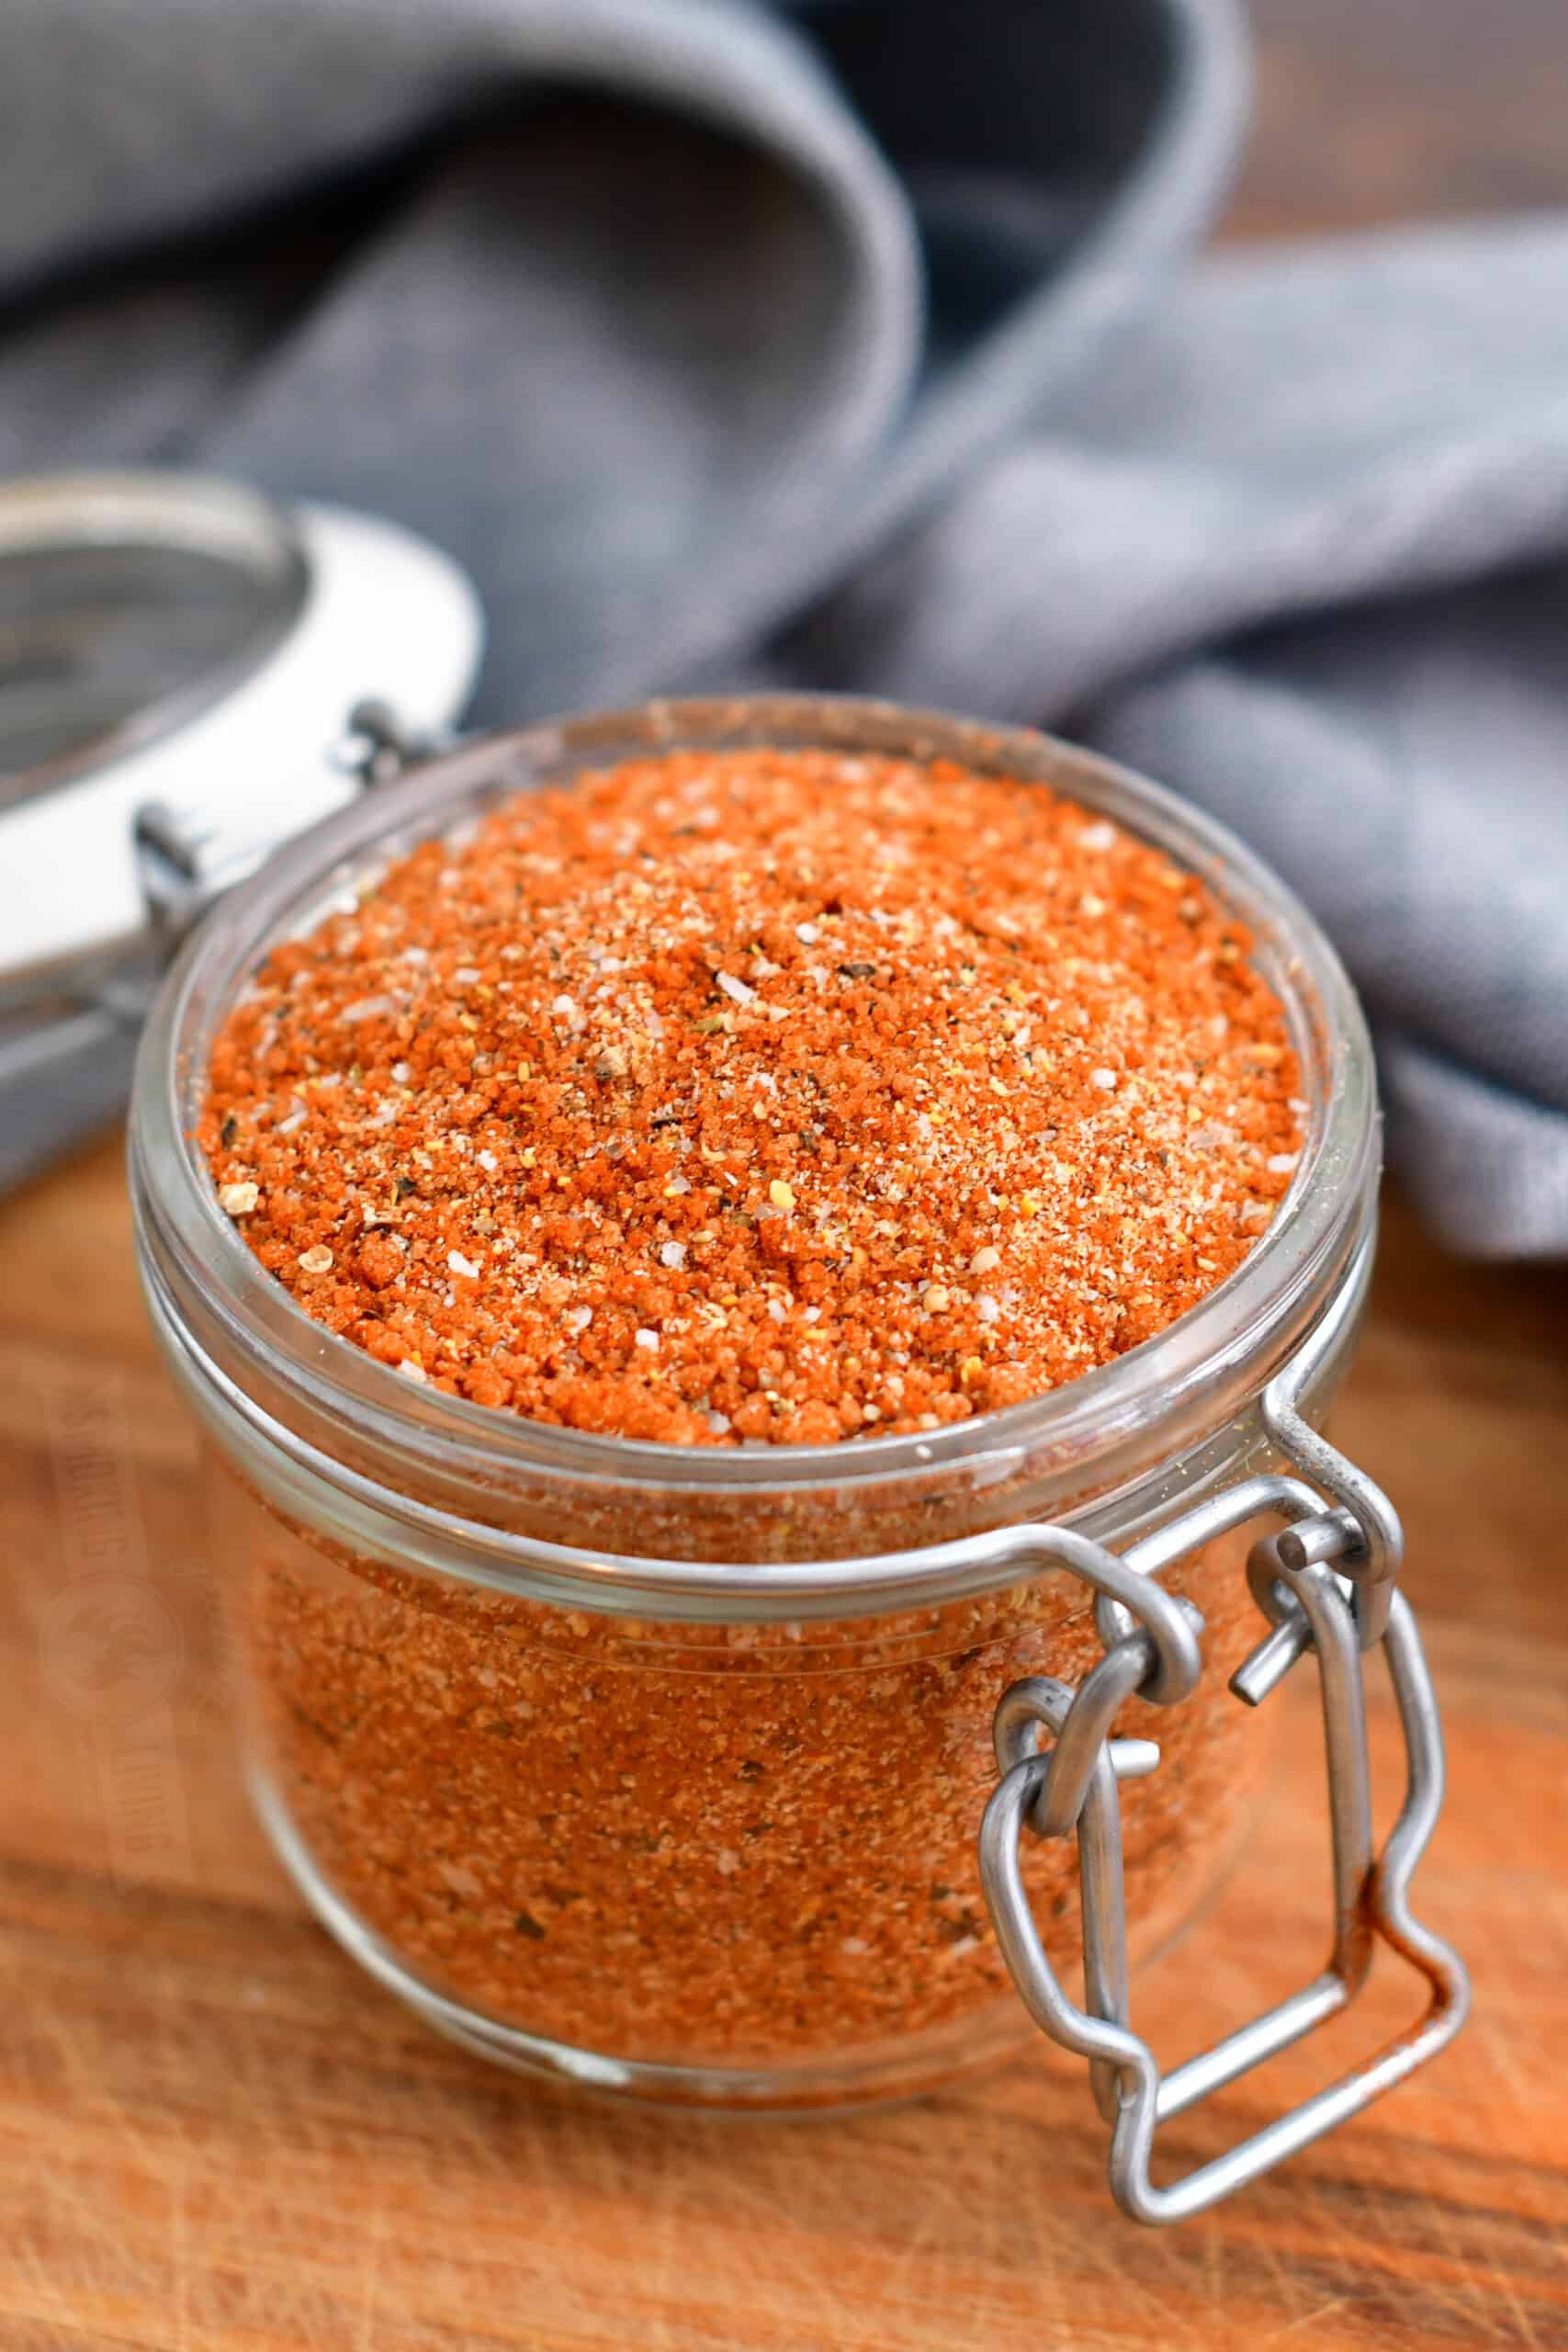 Dry Rub For Ribs - The Best Homemade Dry Rub For Your Ribs